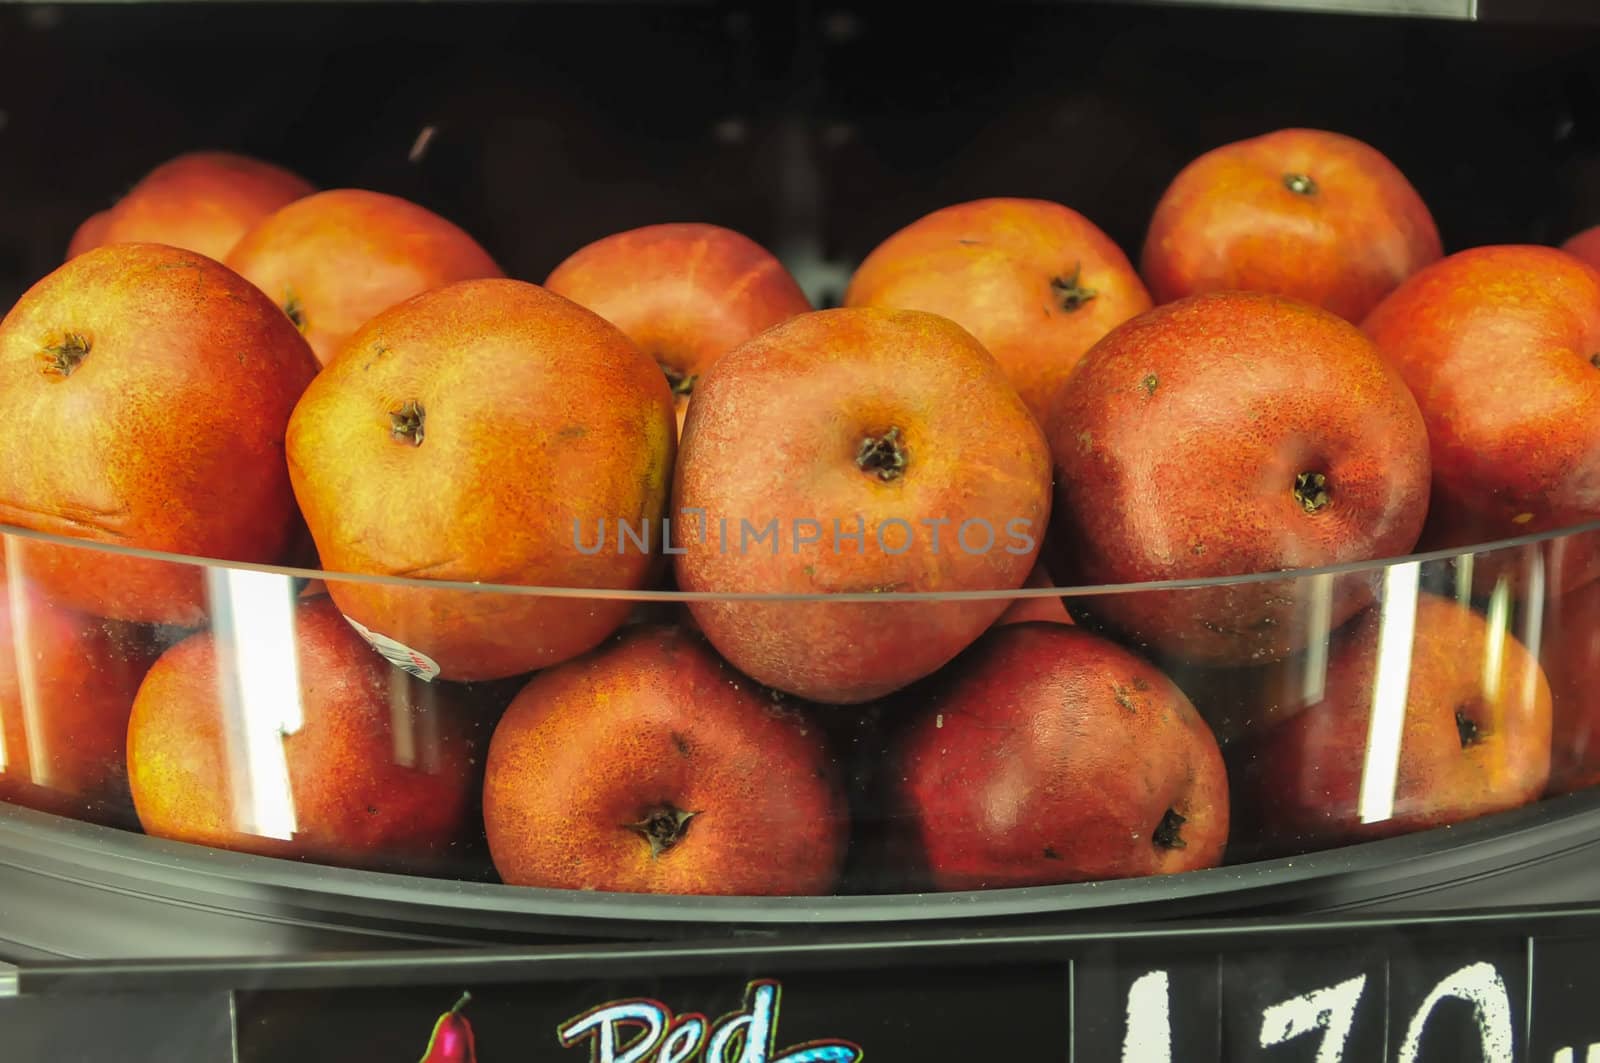 apples on shelf at the supermarket on display by digidreamgrafix